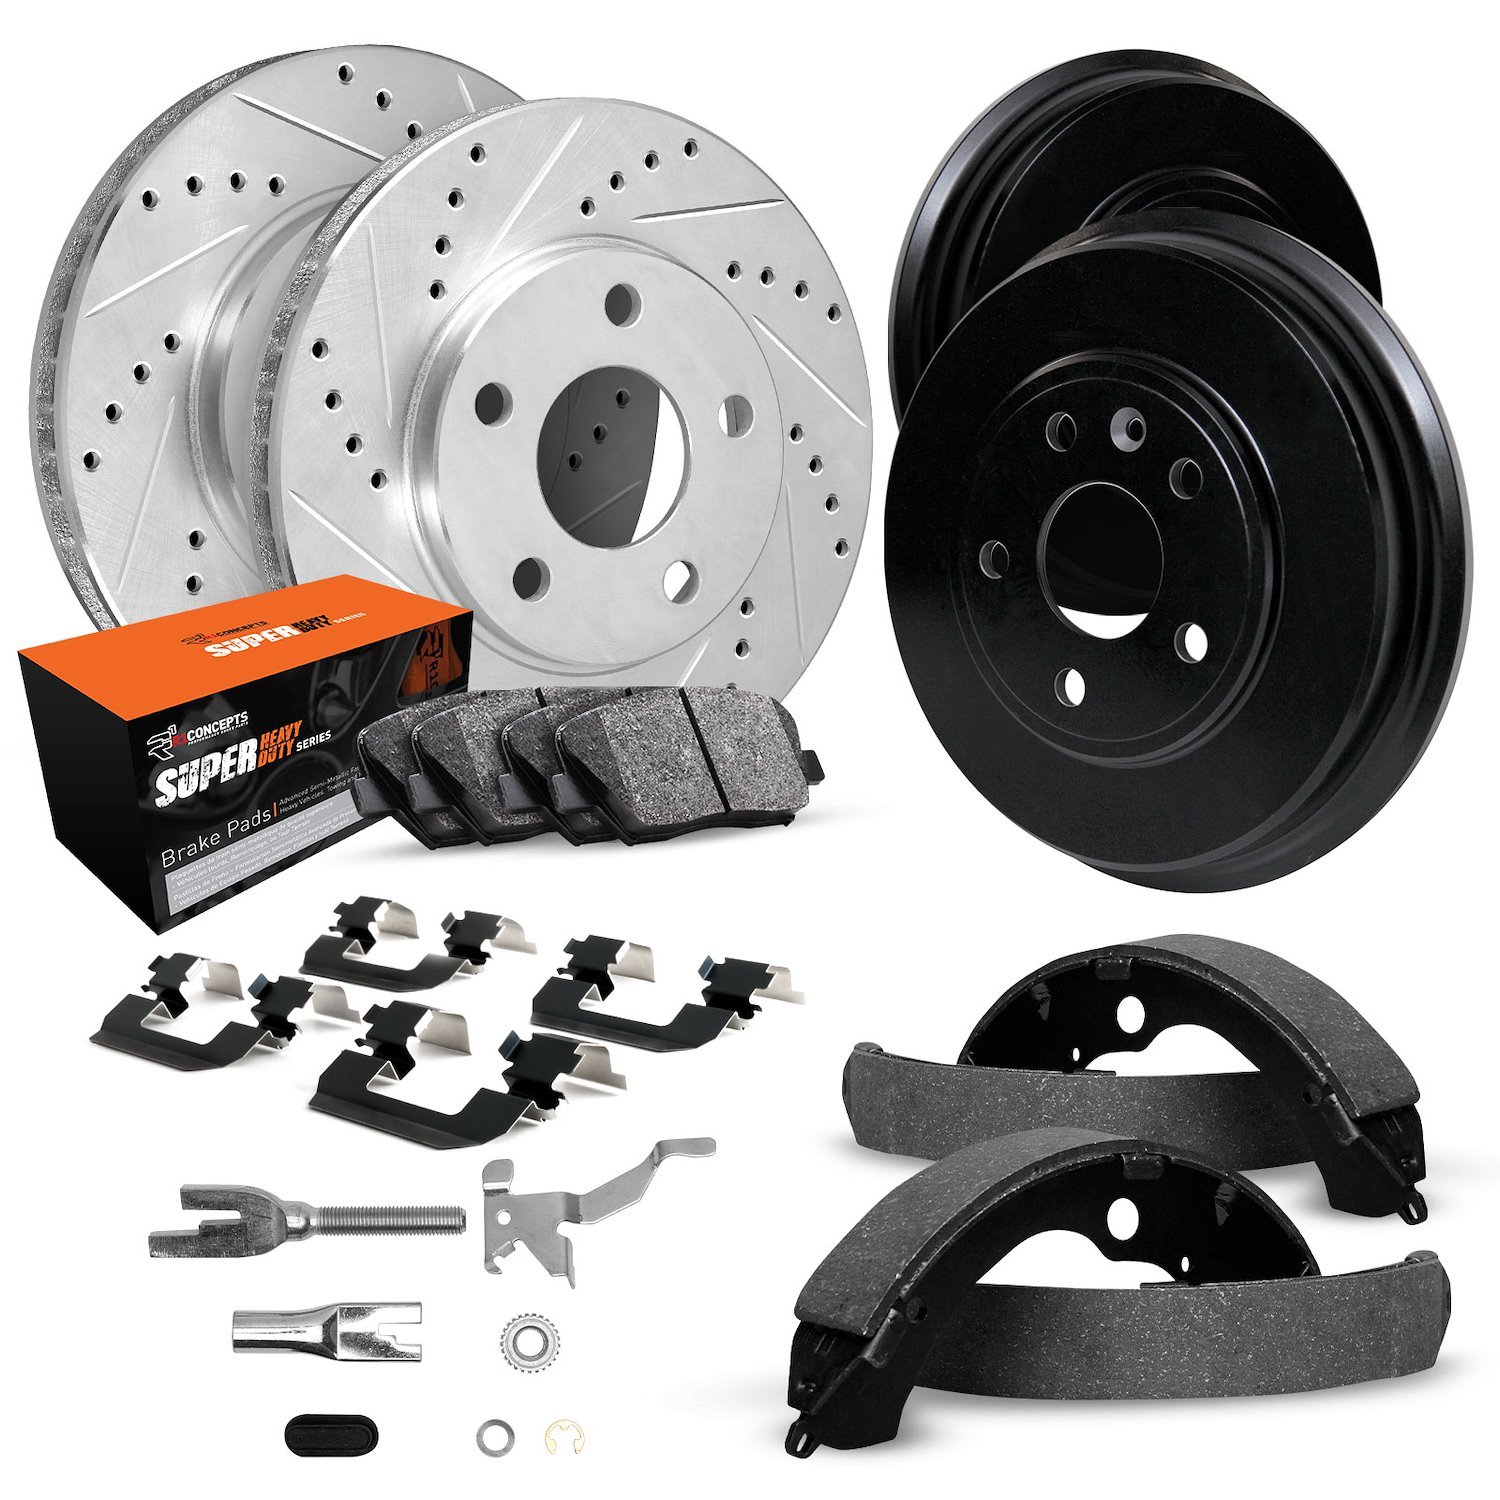 E-Line Drilled/Slotted Silver Rotor & Drum Set w/Super-Duty Pads, Shoes/Hardware/Adjusters, 1998-1999 Mopar